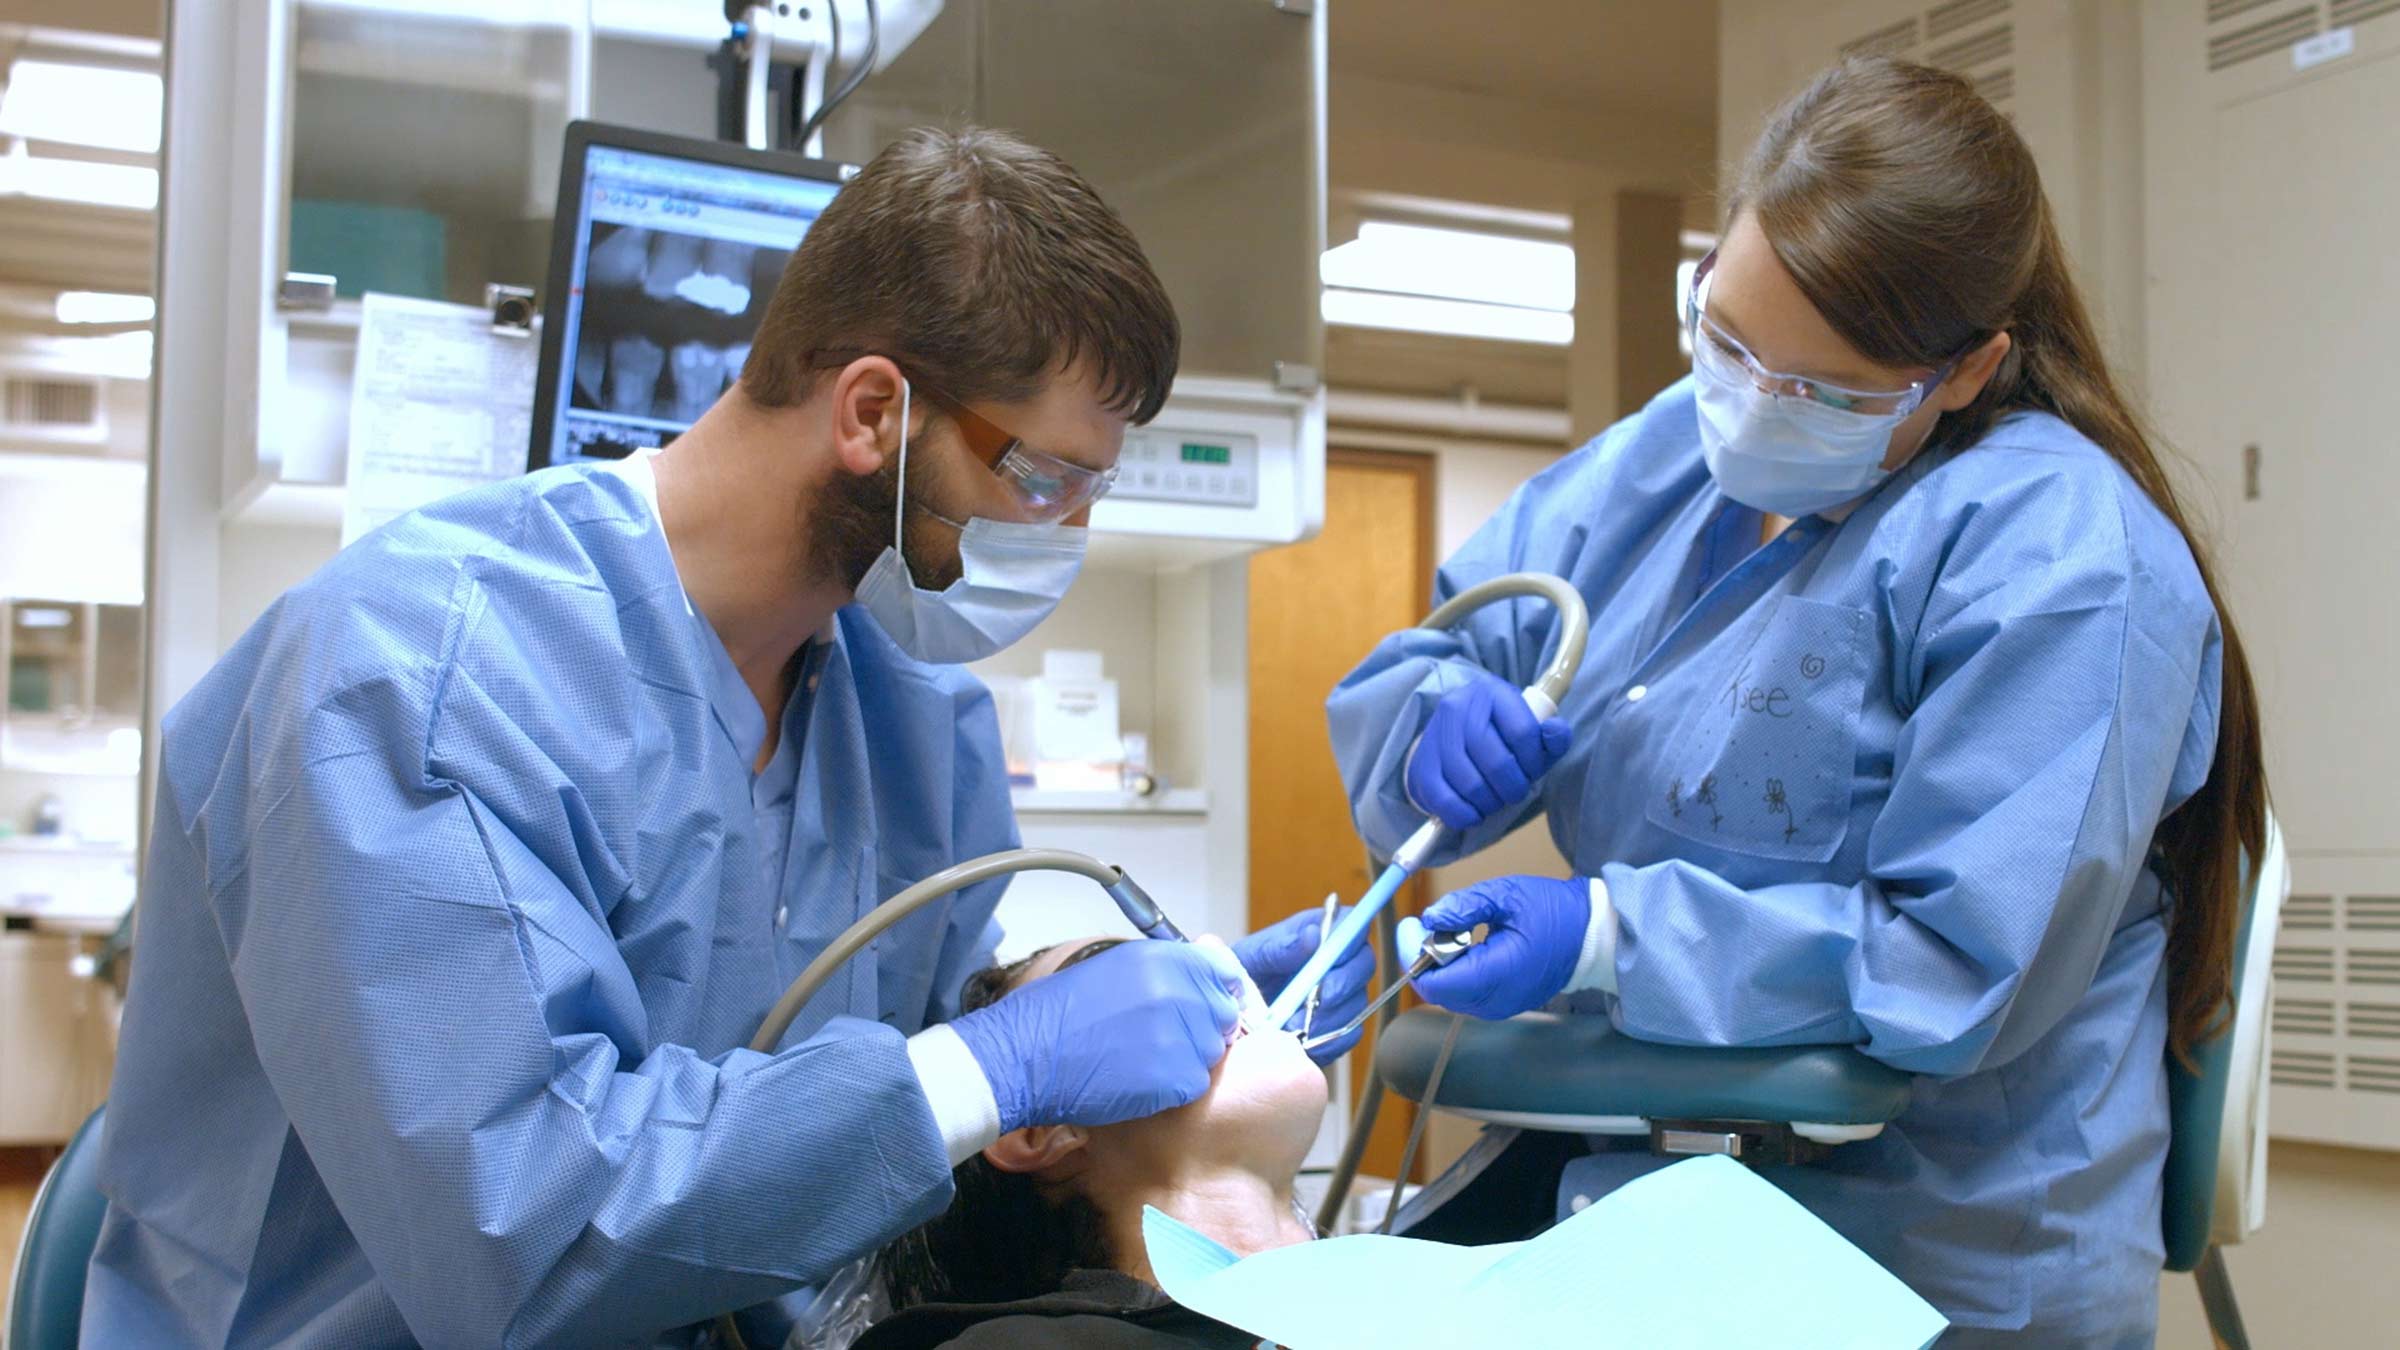 Ohio State College of Dentistry students providing free dental cleanings